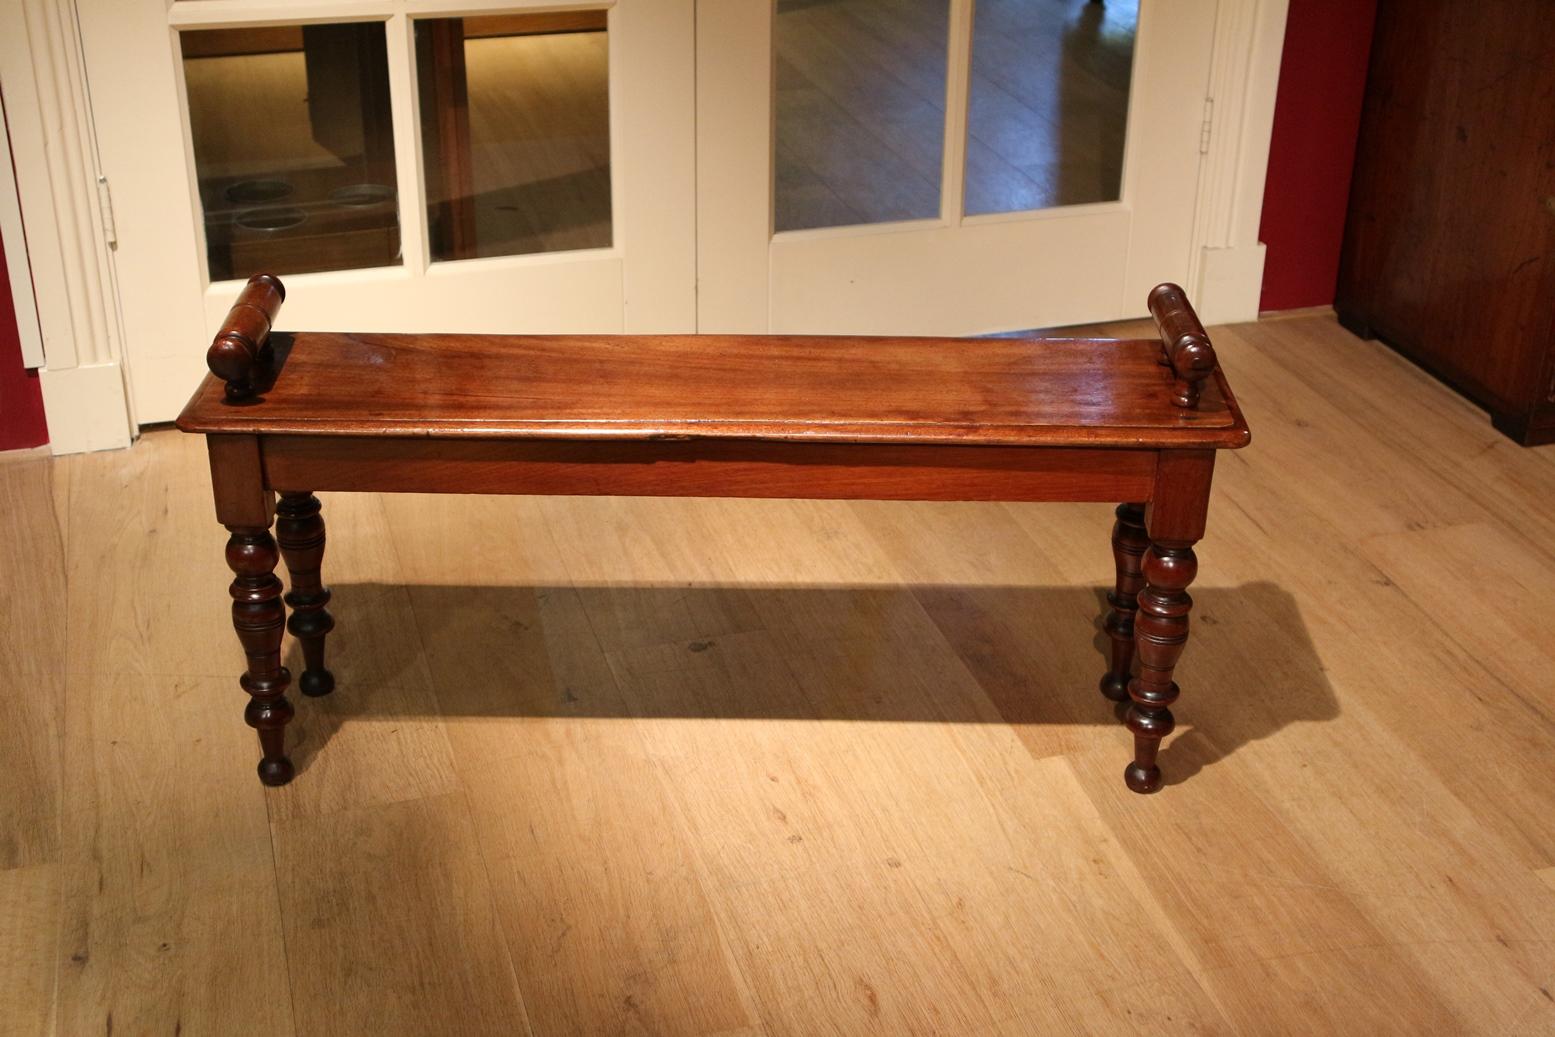 Victorian mahogany window seat from the Victorian era. Completely in perfect and original condition. Nice patina.
Origin: England
Period: circa 1840
Size: W. 98 cm, D. 24 cm, H. 46 cm.